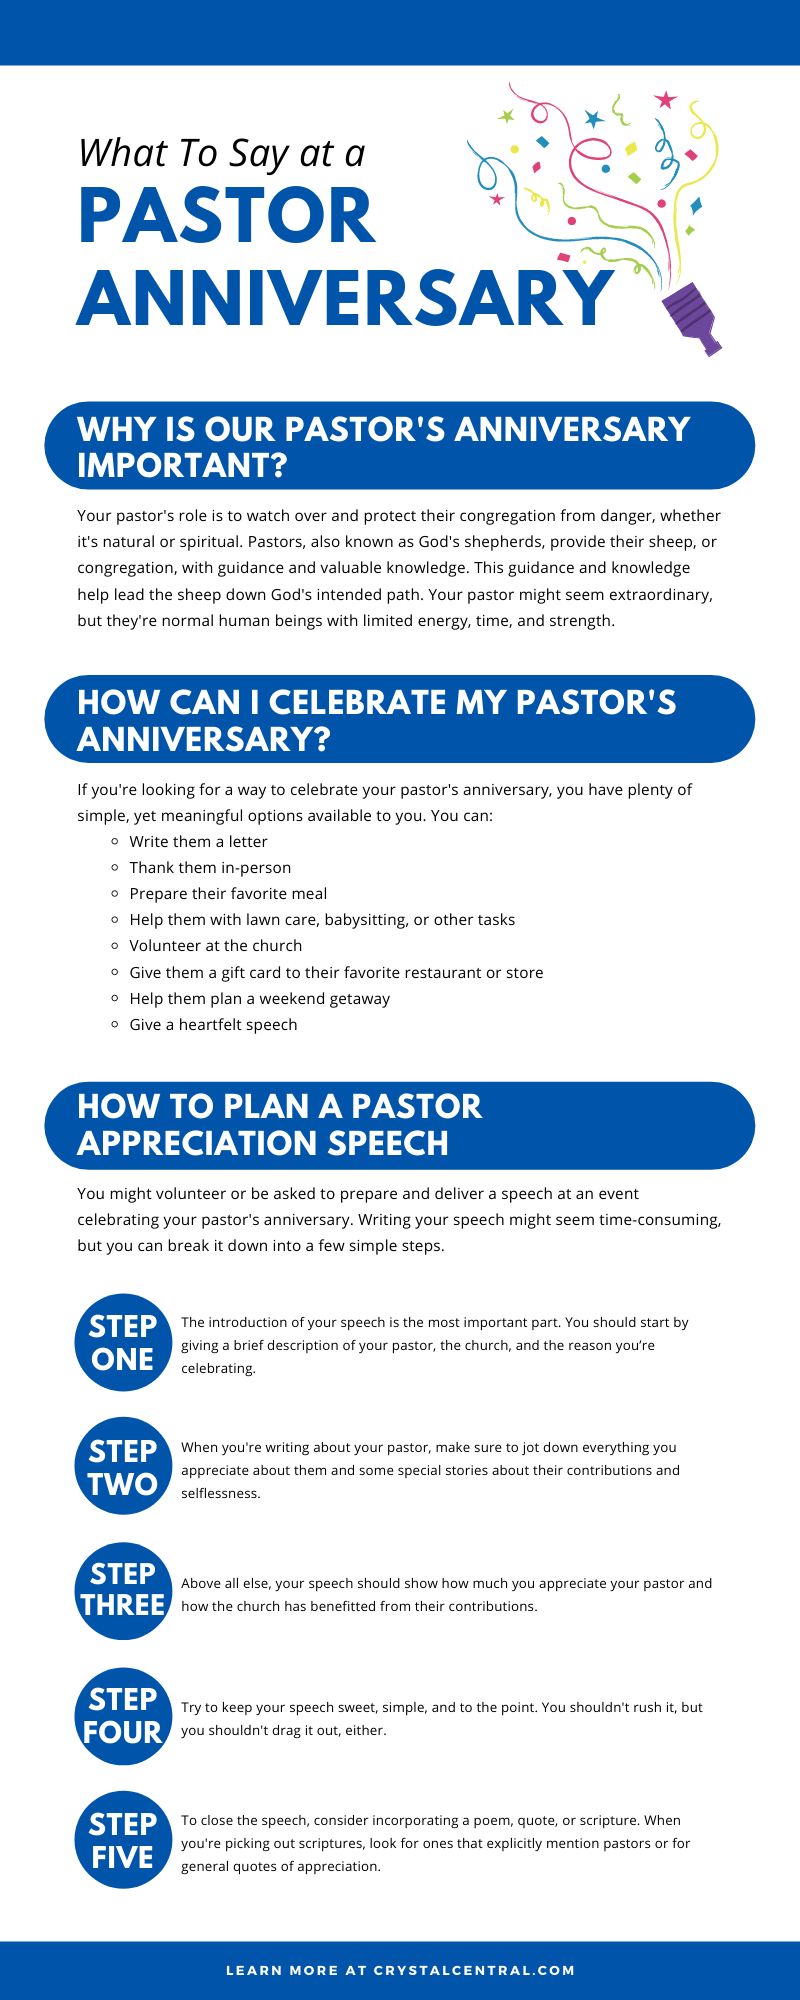 What To Say at a Pastor Anniversary